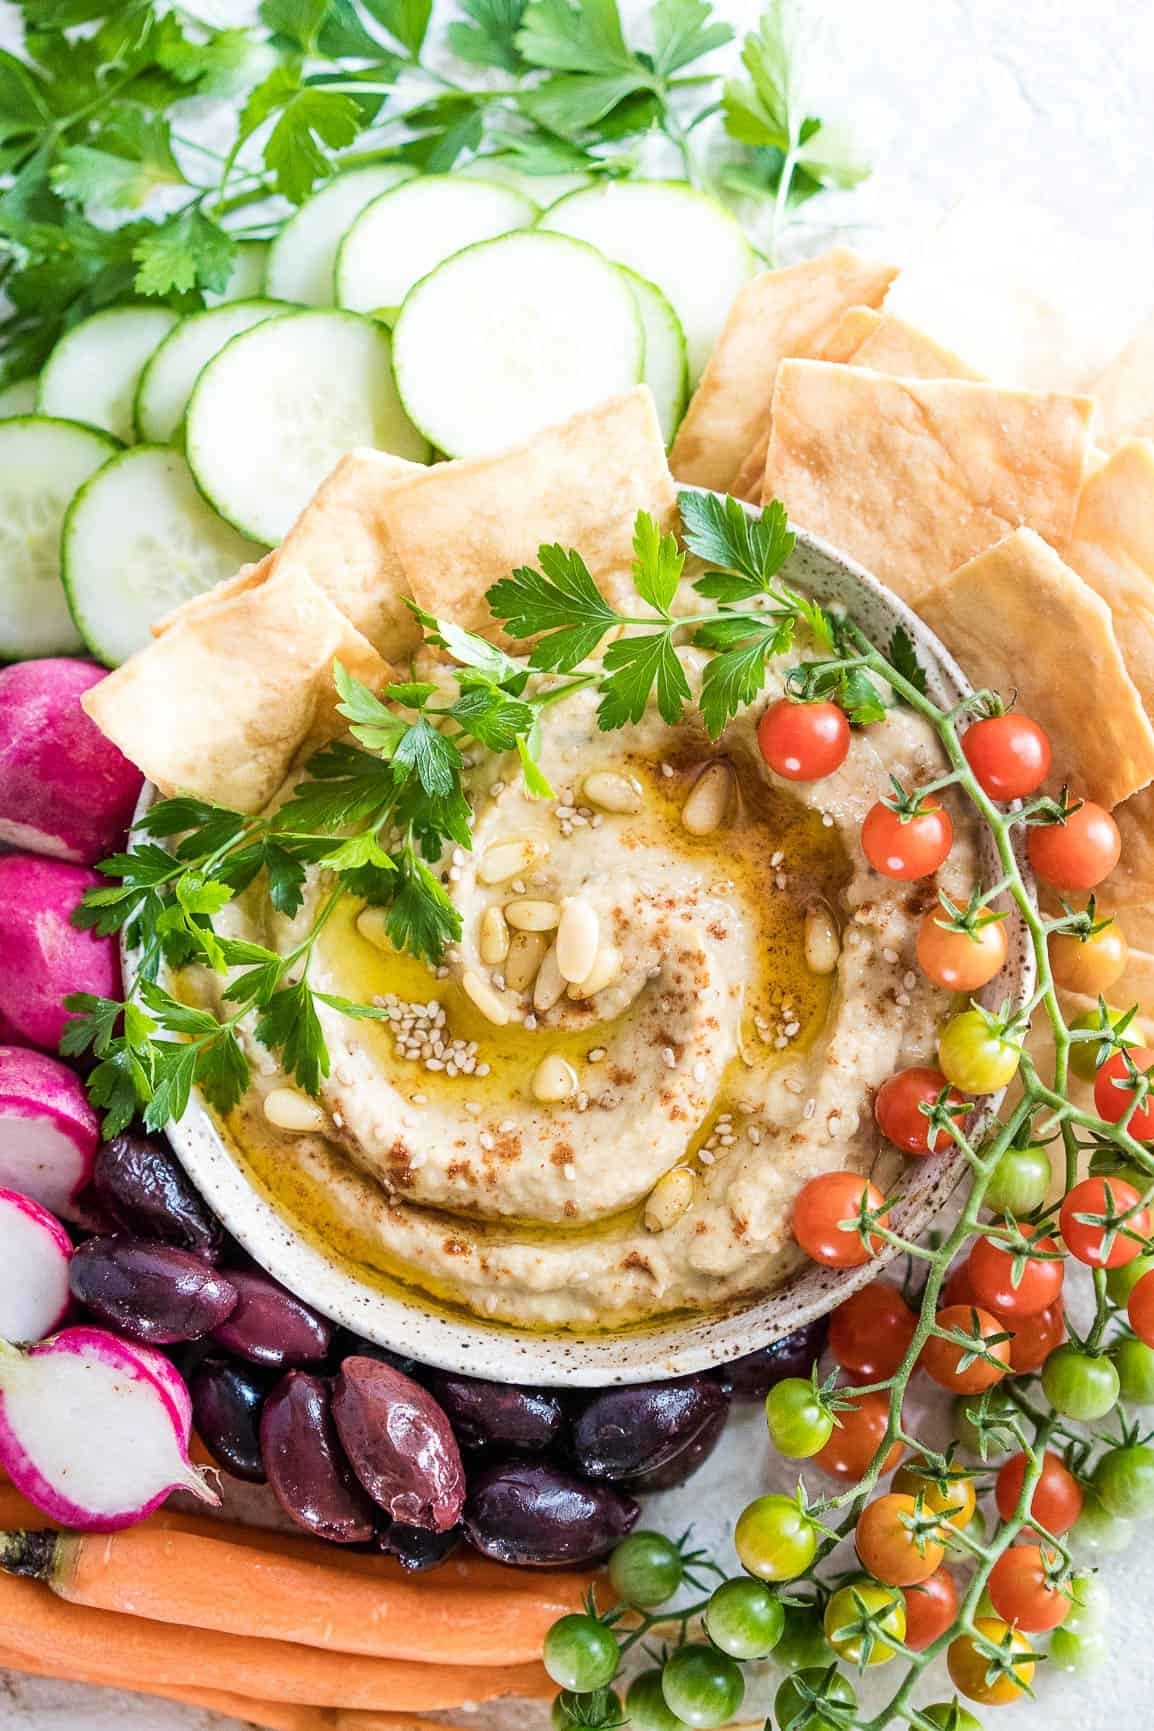 A creamy dip topped with oil, nuts, seeds, and herbs surrounded by colorful veggies and pita chips